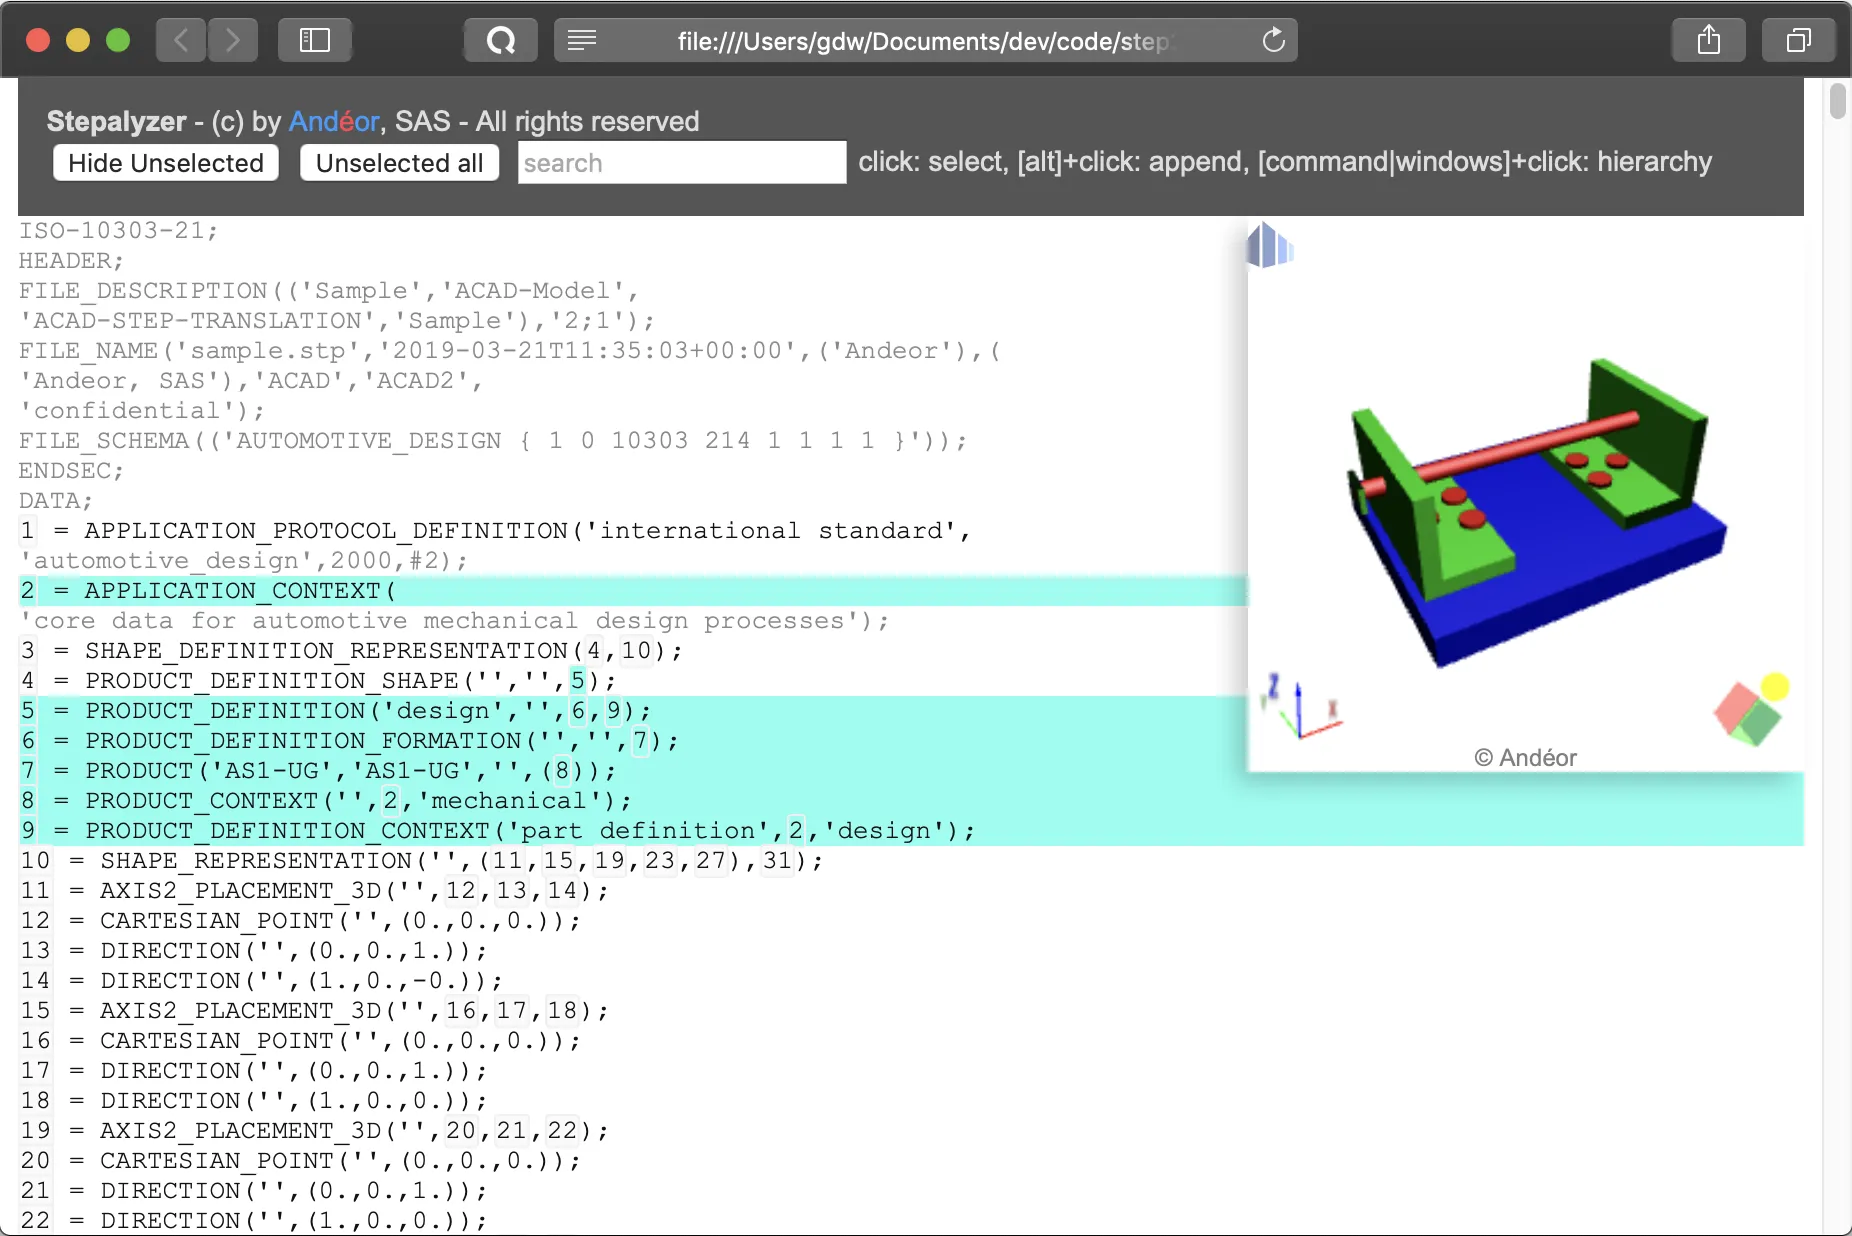 Obtain an interactive analysis Web page with embedded 3D viewer from any Step file.